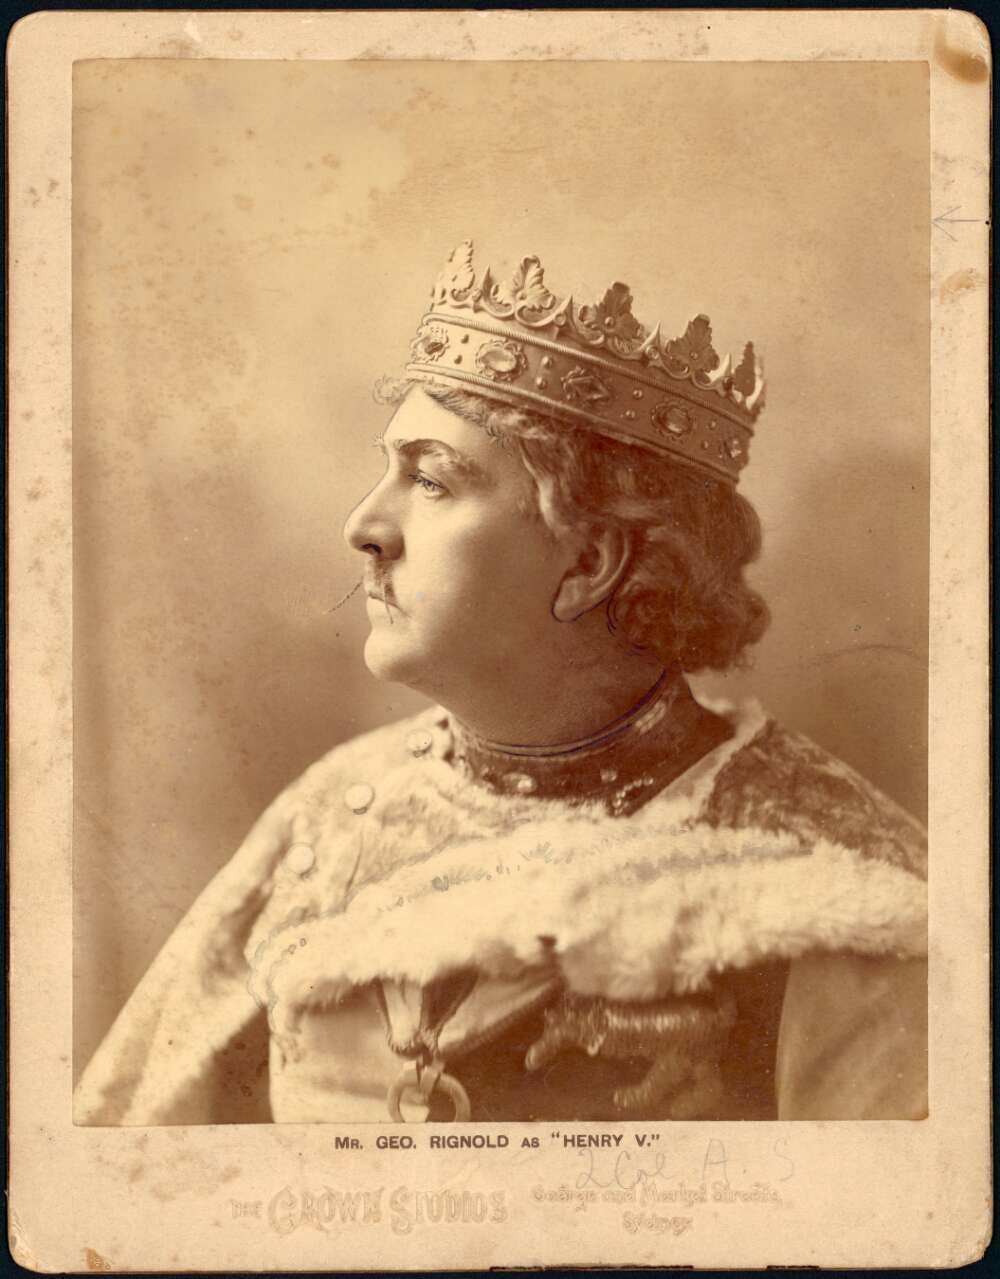 Man wearing crown and formal attire